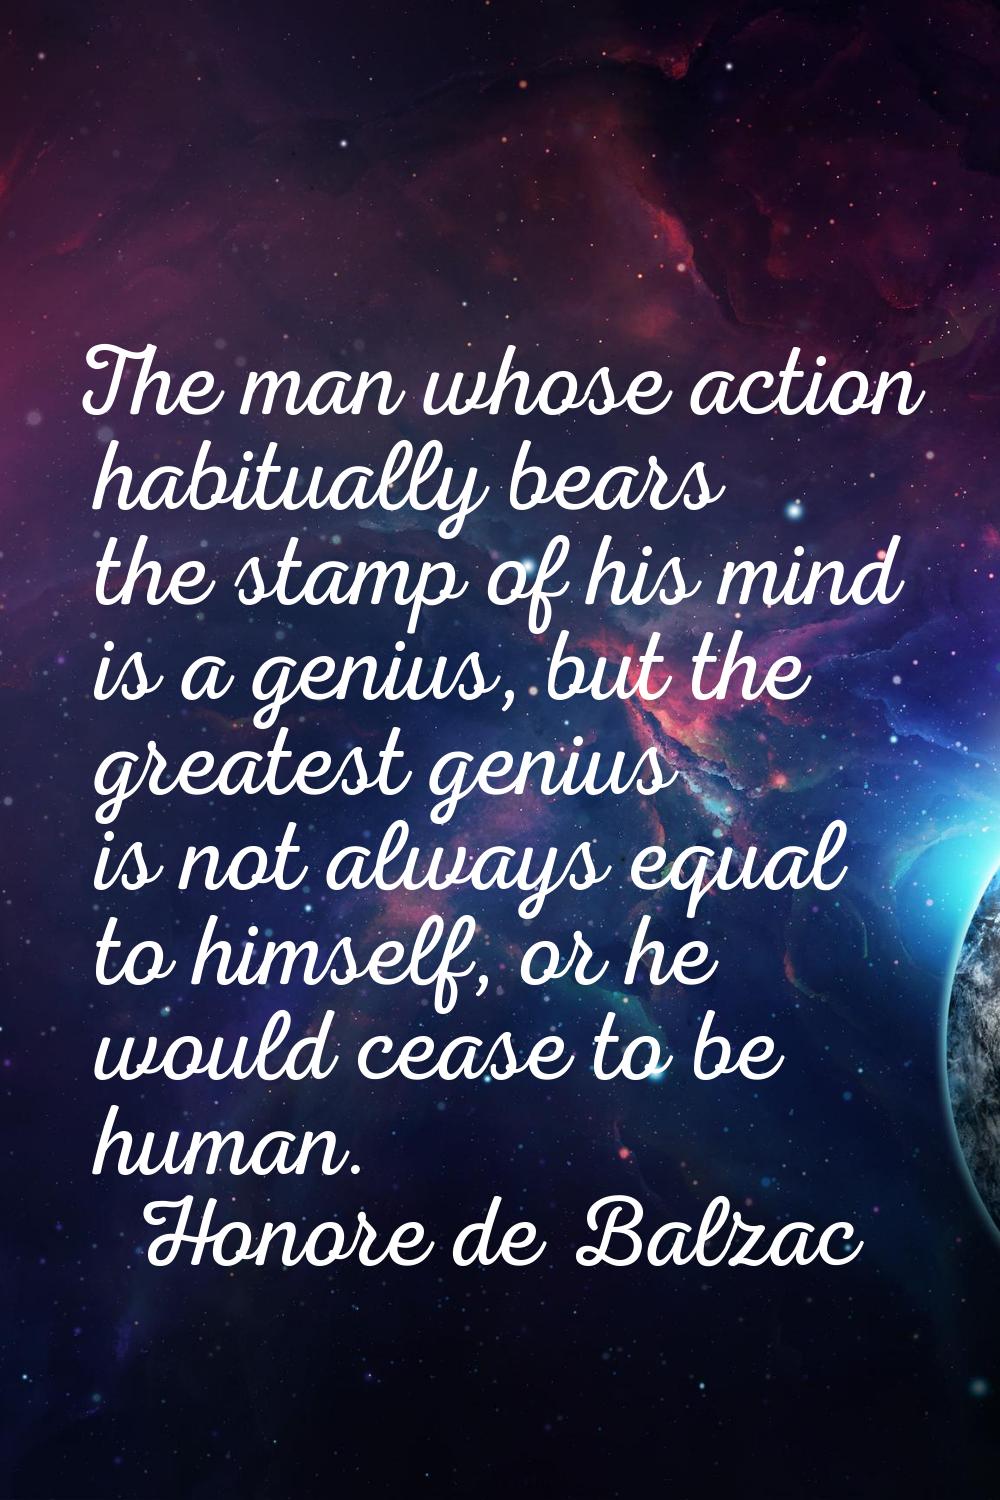 The man whose action habitually bears the stamp of his mind is a genius, but the greatest genius is